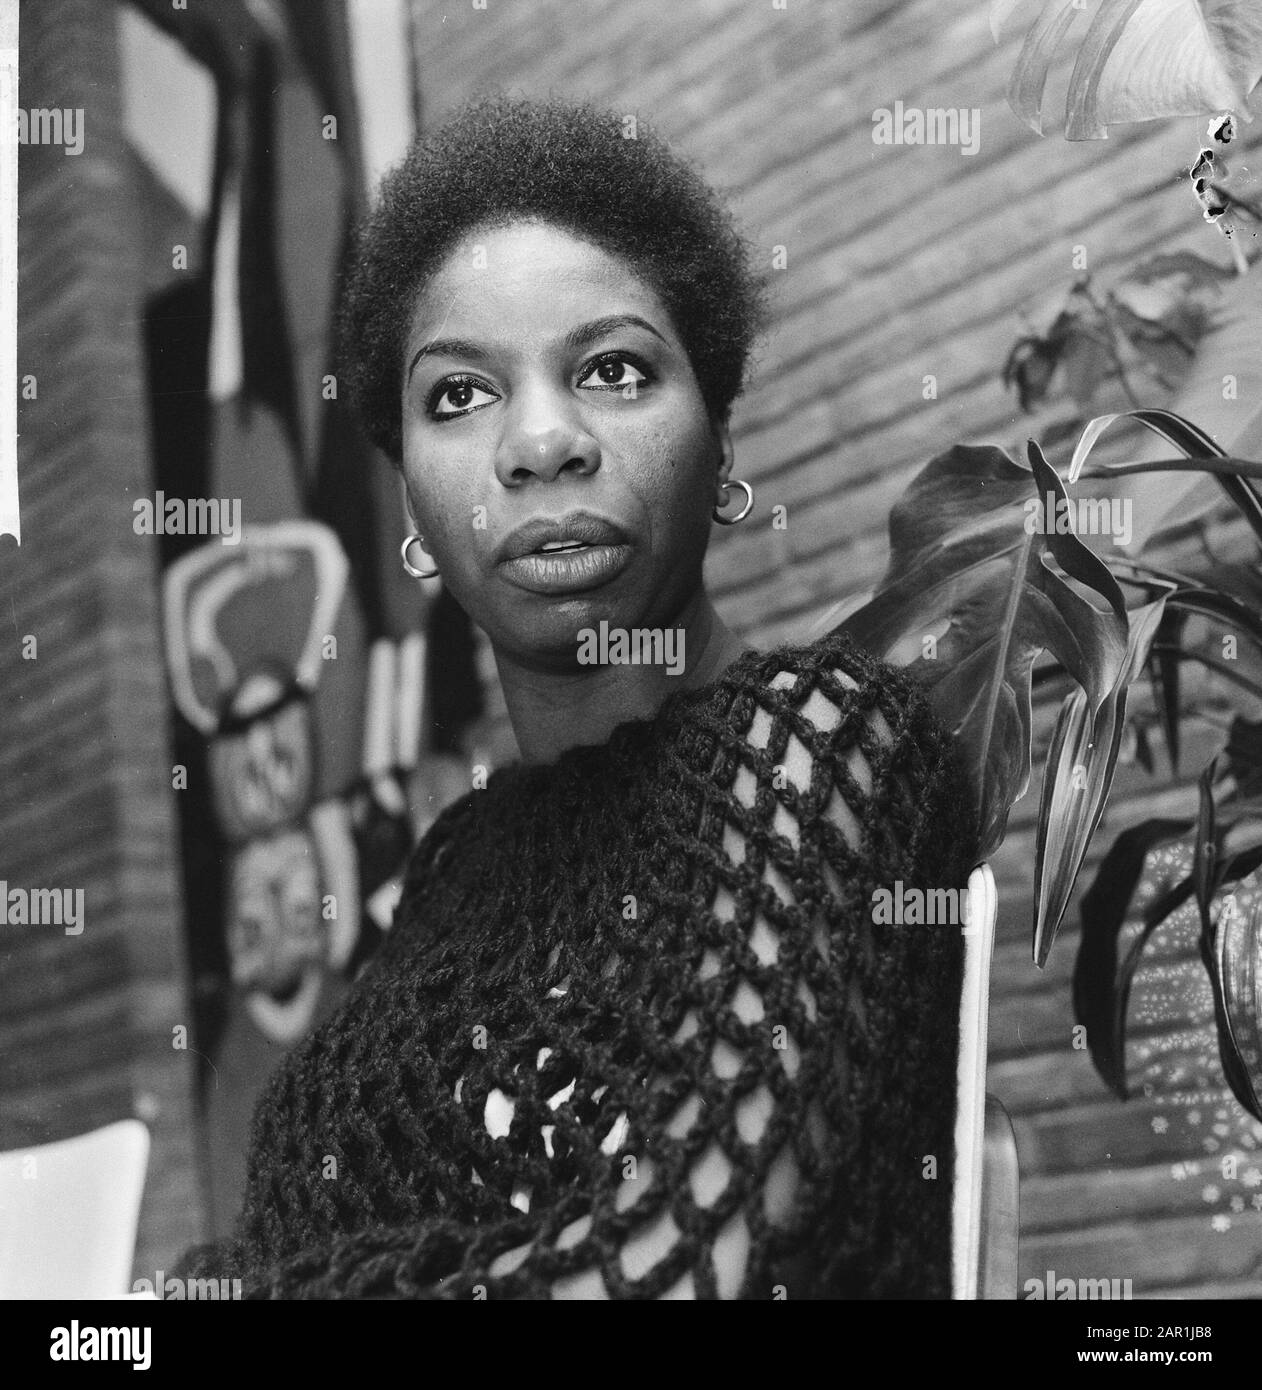 Portrait of American singer Nina Simone who will appear on television at Christmas Date: December 14, 1965 Keywords: portraits, singers Personal name: Simone, Nina Stock Photo